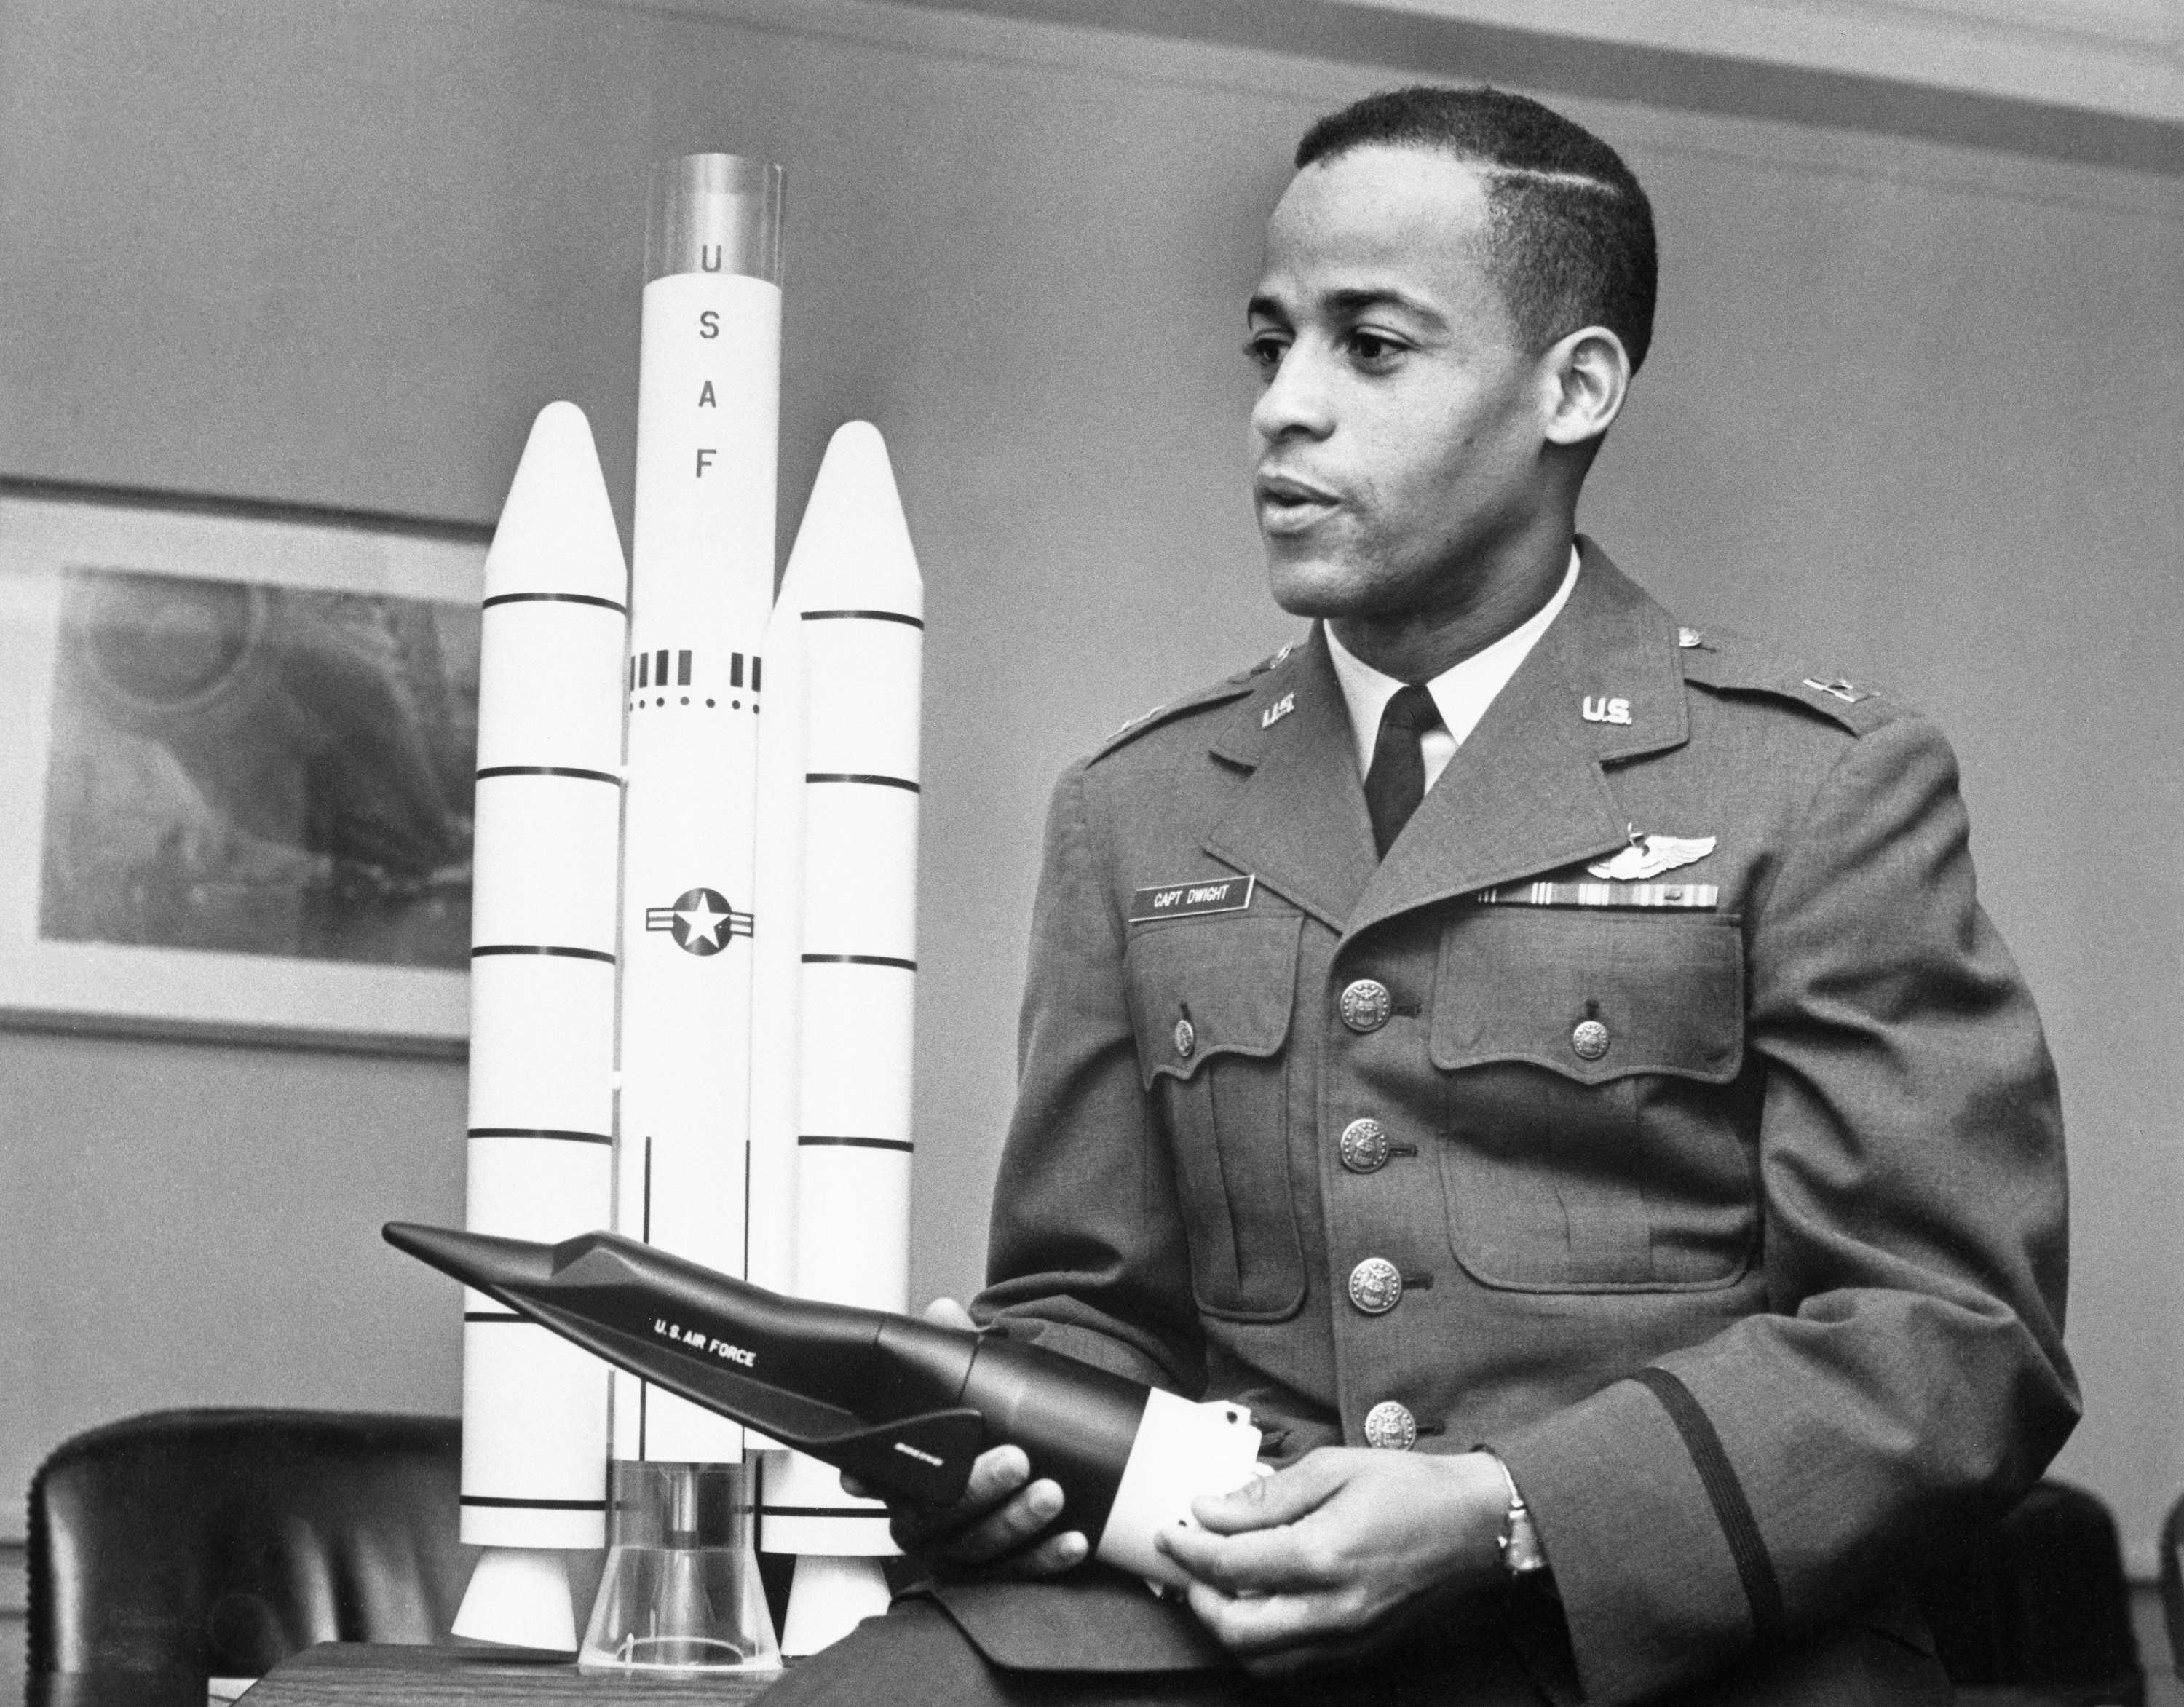 A black and white photo of Captain Dwight Jr. sitting on a desk holding a model U.S Air force plane in his hand.